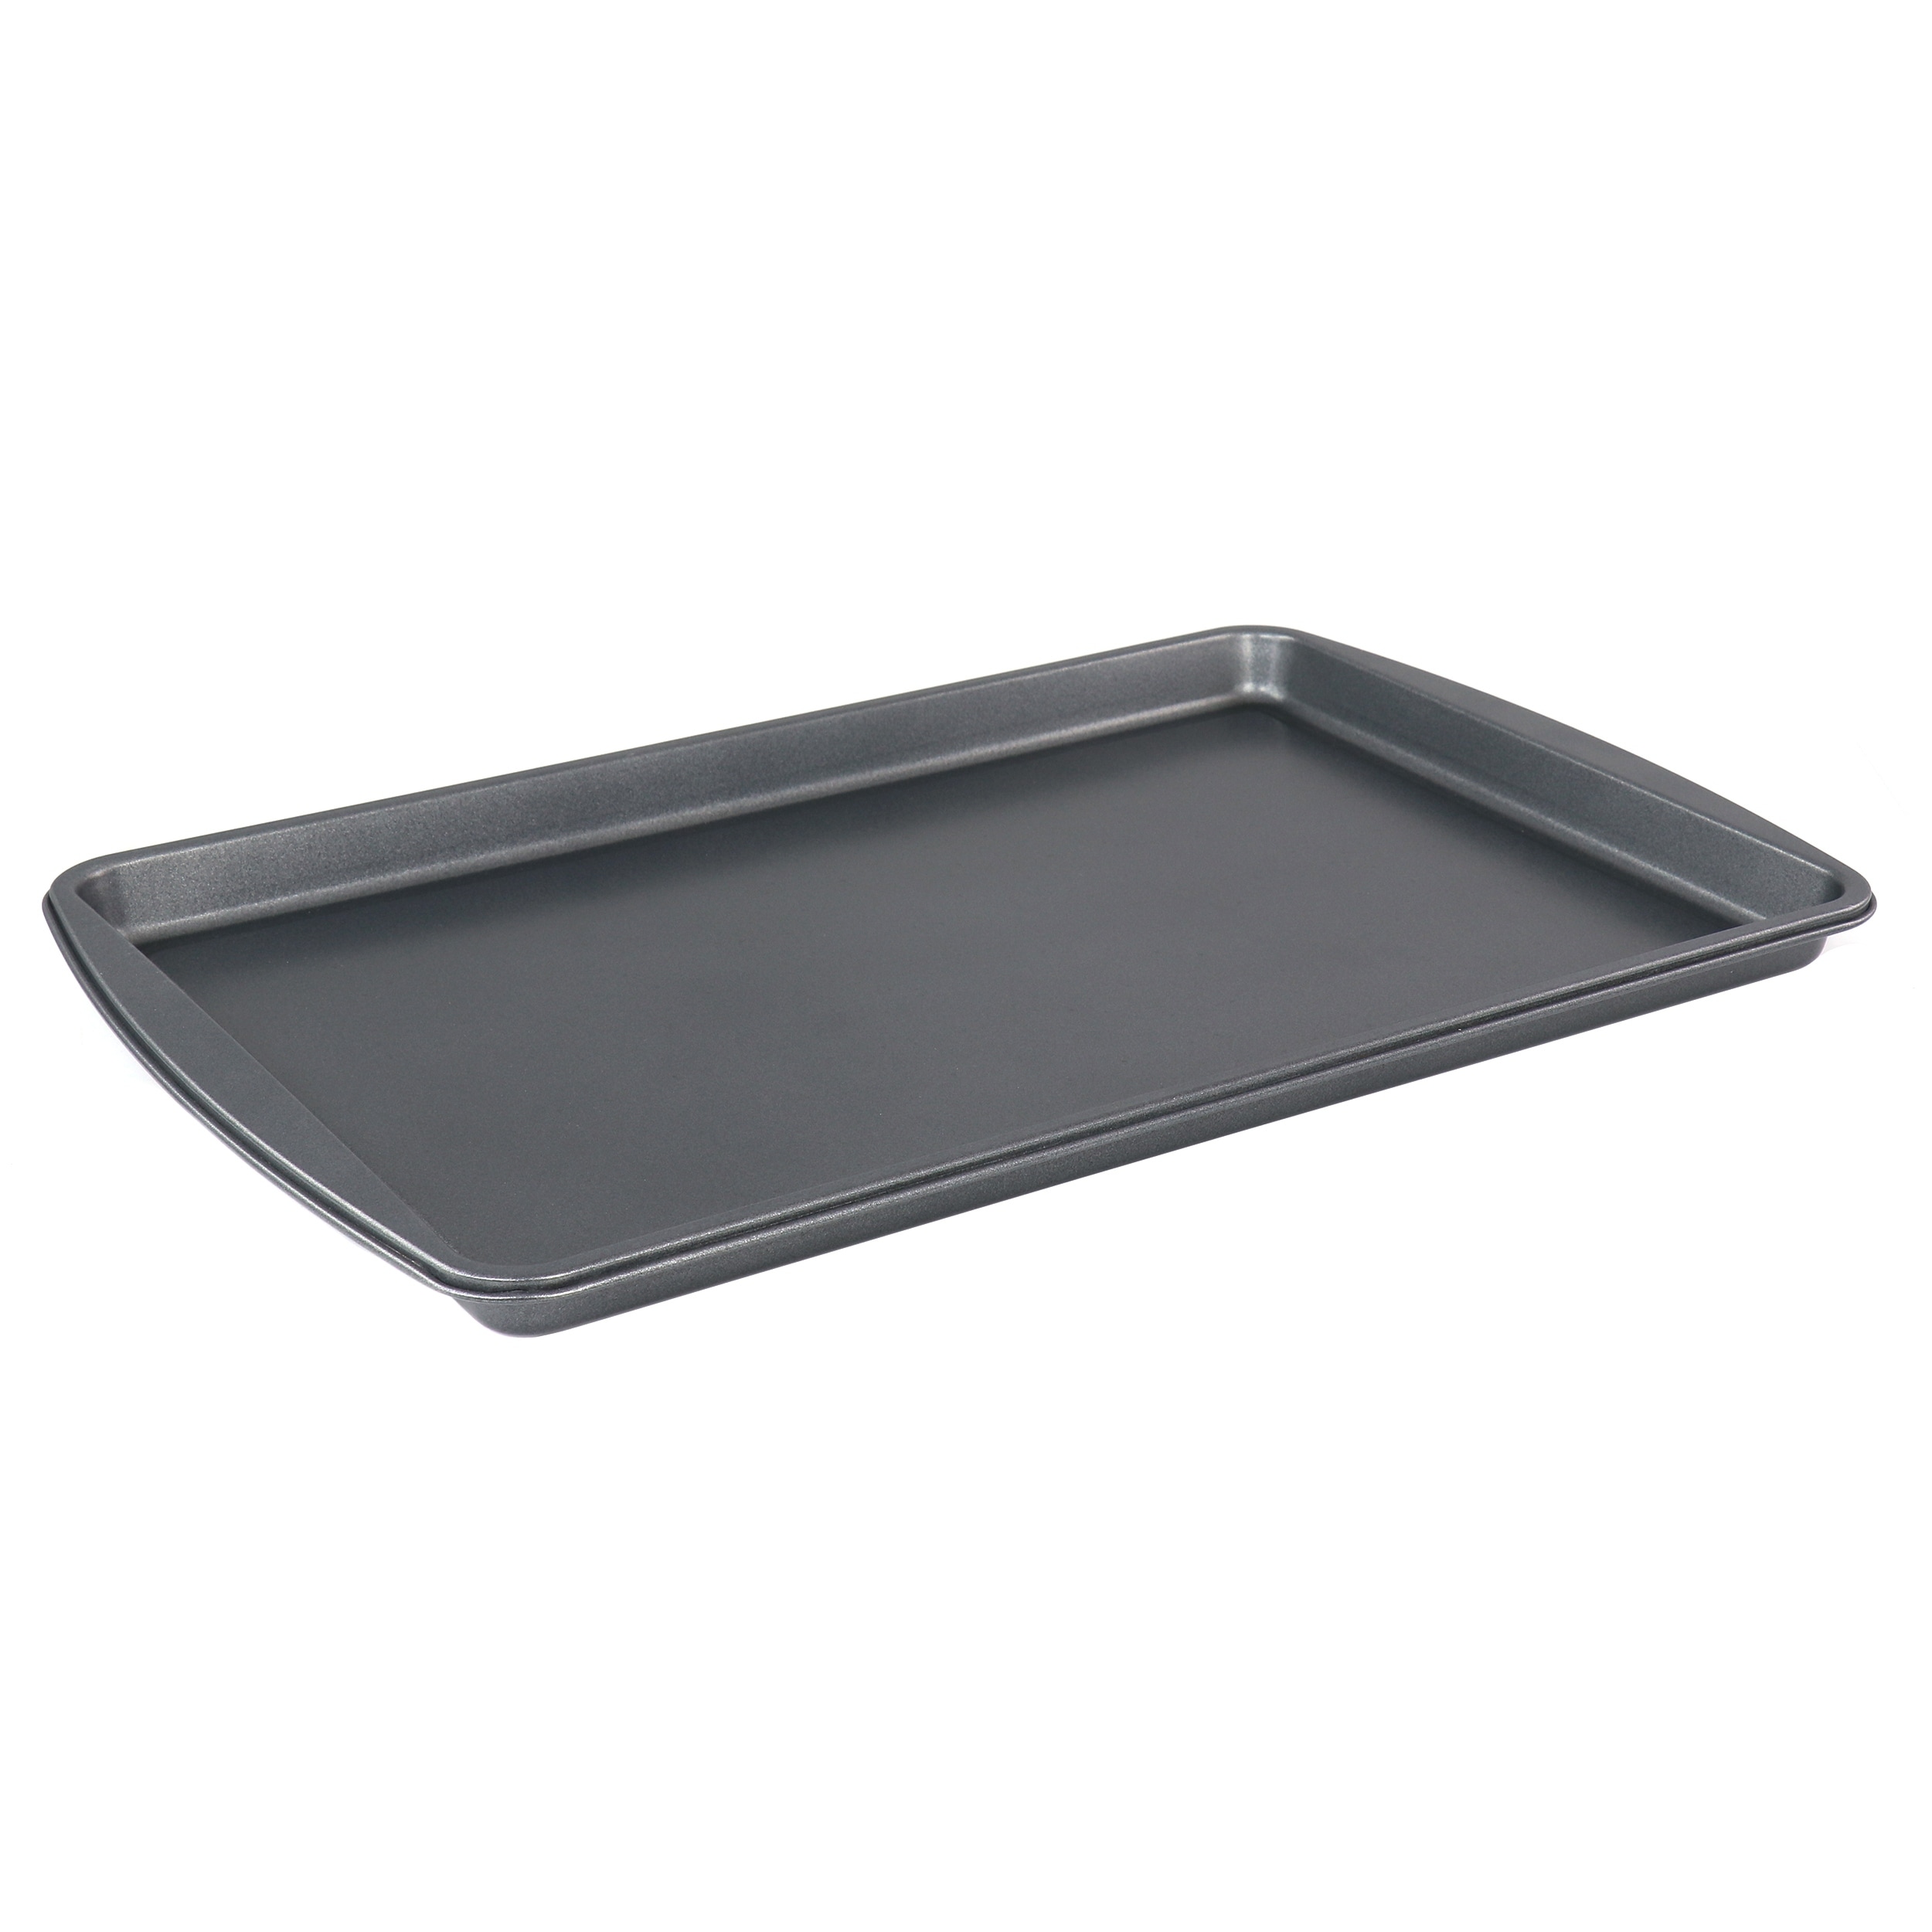 Simply Essential Nonstick Rectangle Aluminum Baking Sheet Pan - Silver - 1 Piece - 11 x 17 inch